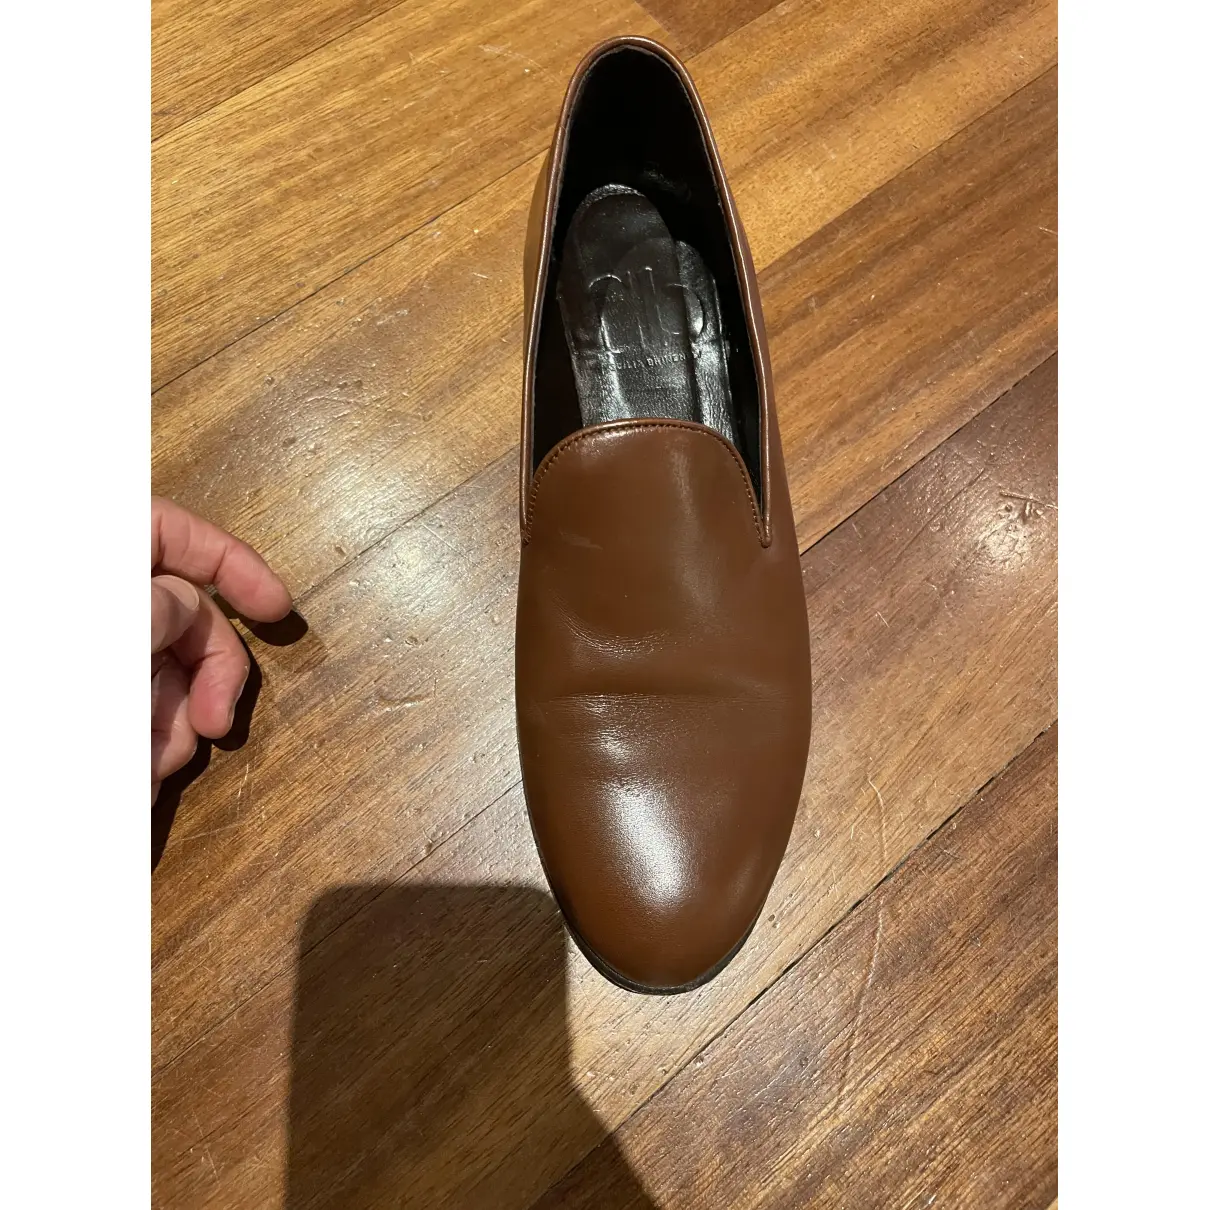 Buy C.B. Made In Italy Leather flats online